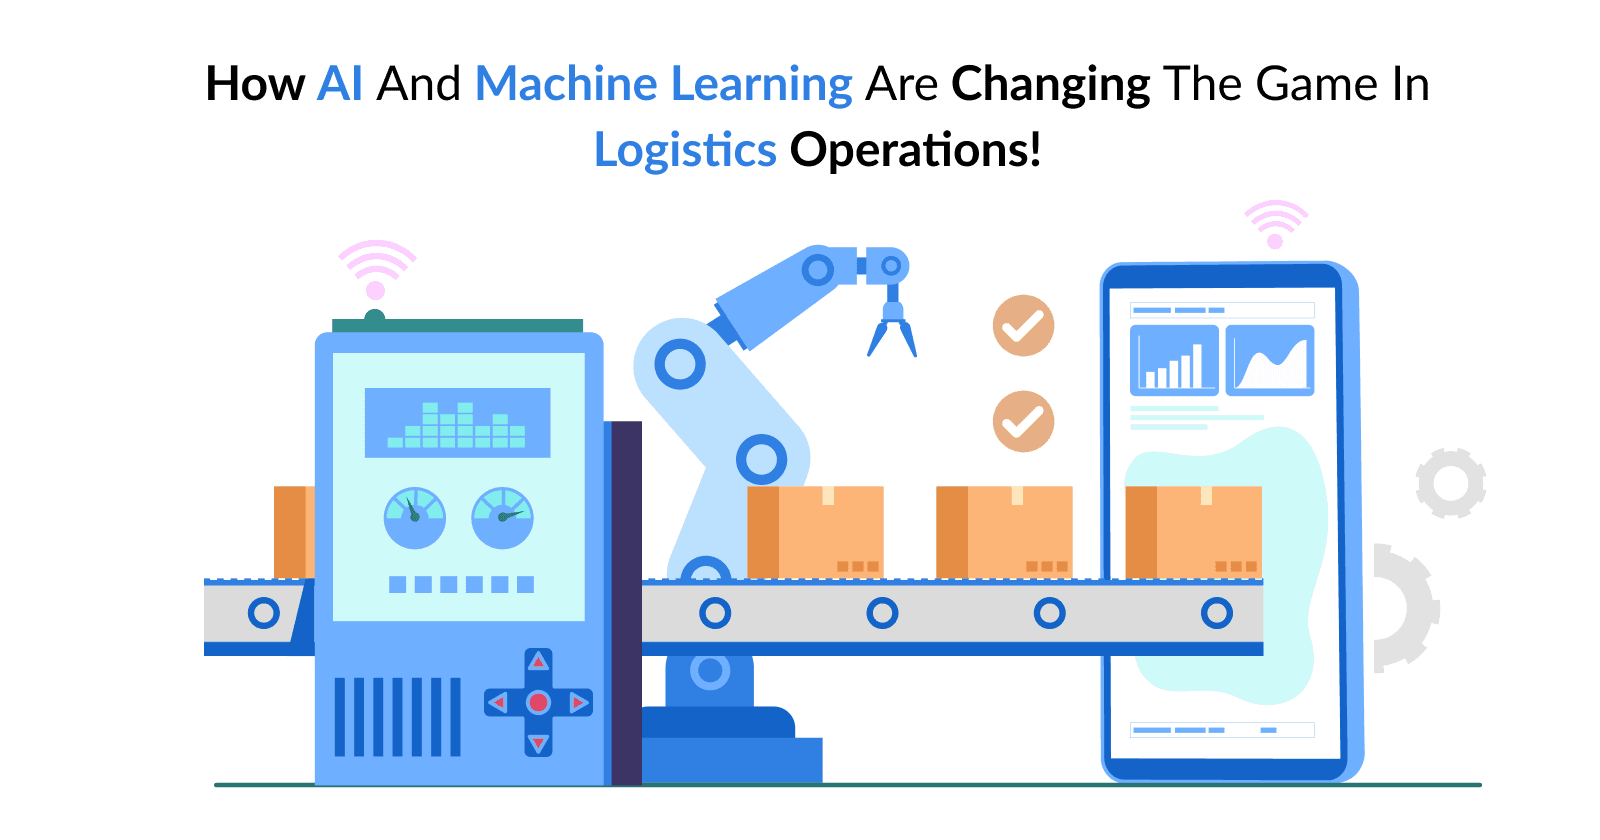 How AI and Machine Learning are changing the game in Logistics Operations!